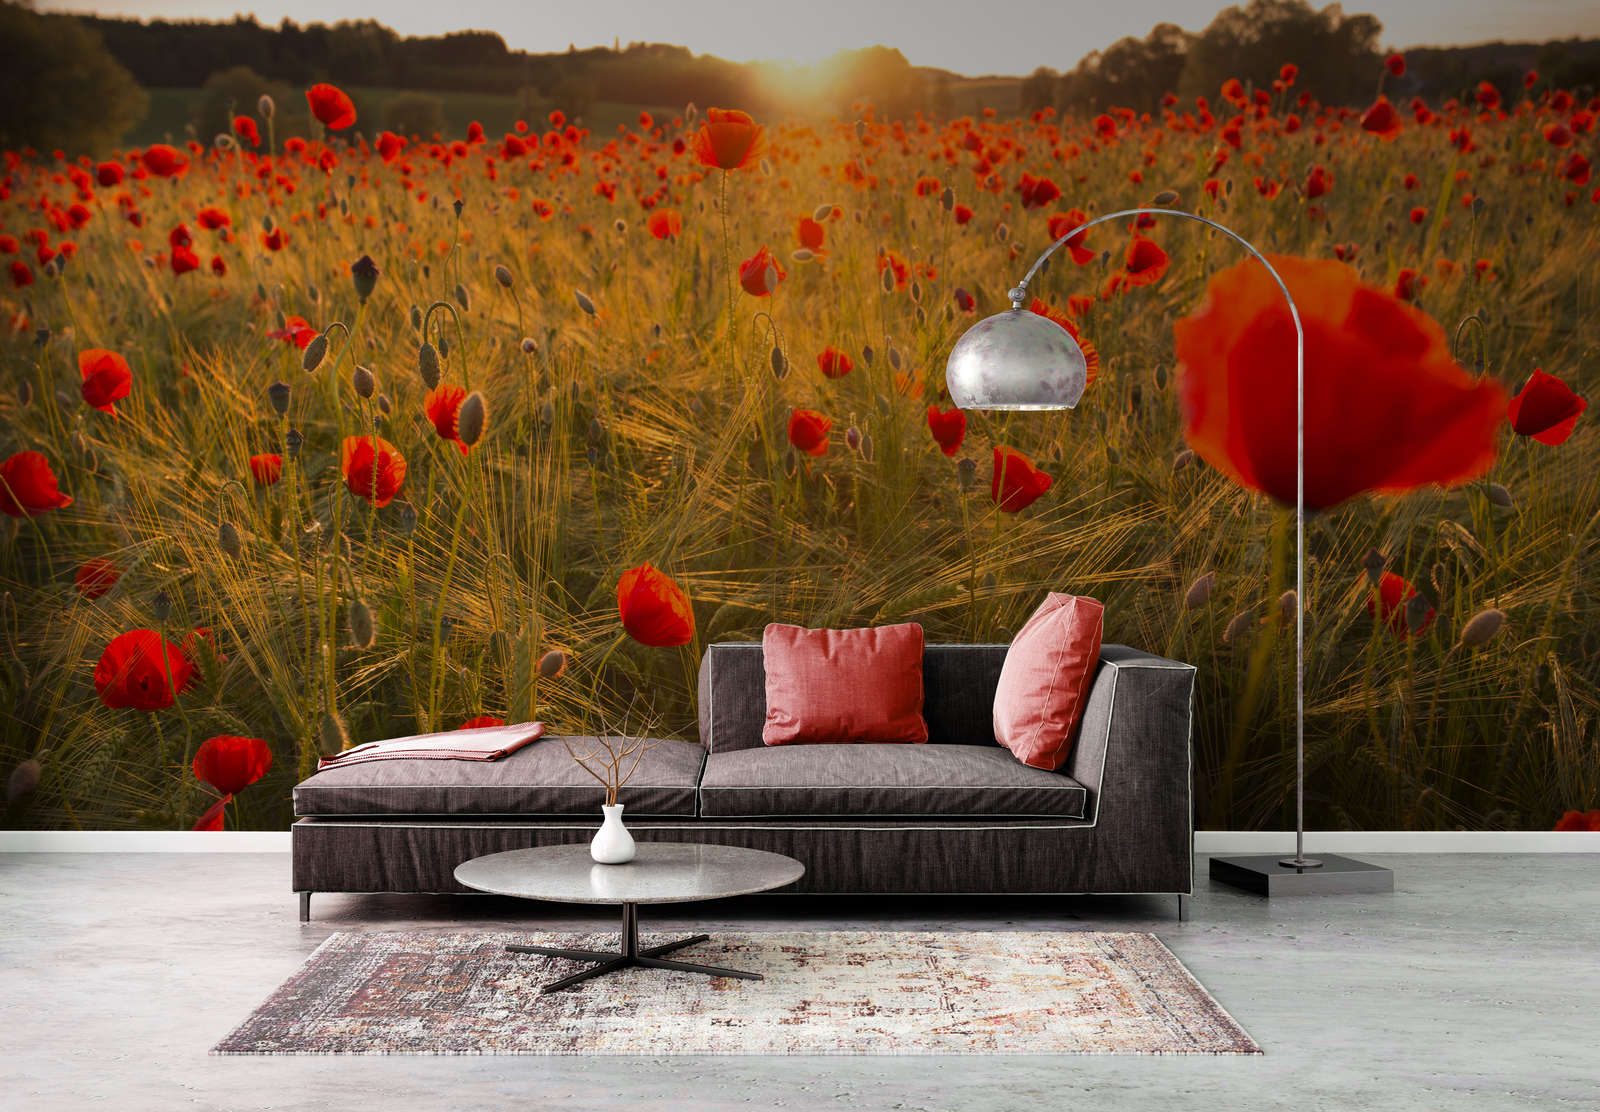             Plants mural red flower meadow on mother of pearl smooth fleece
        